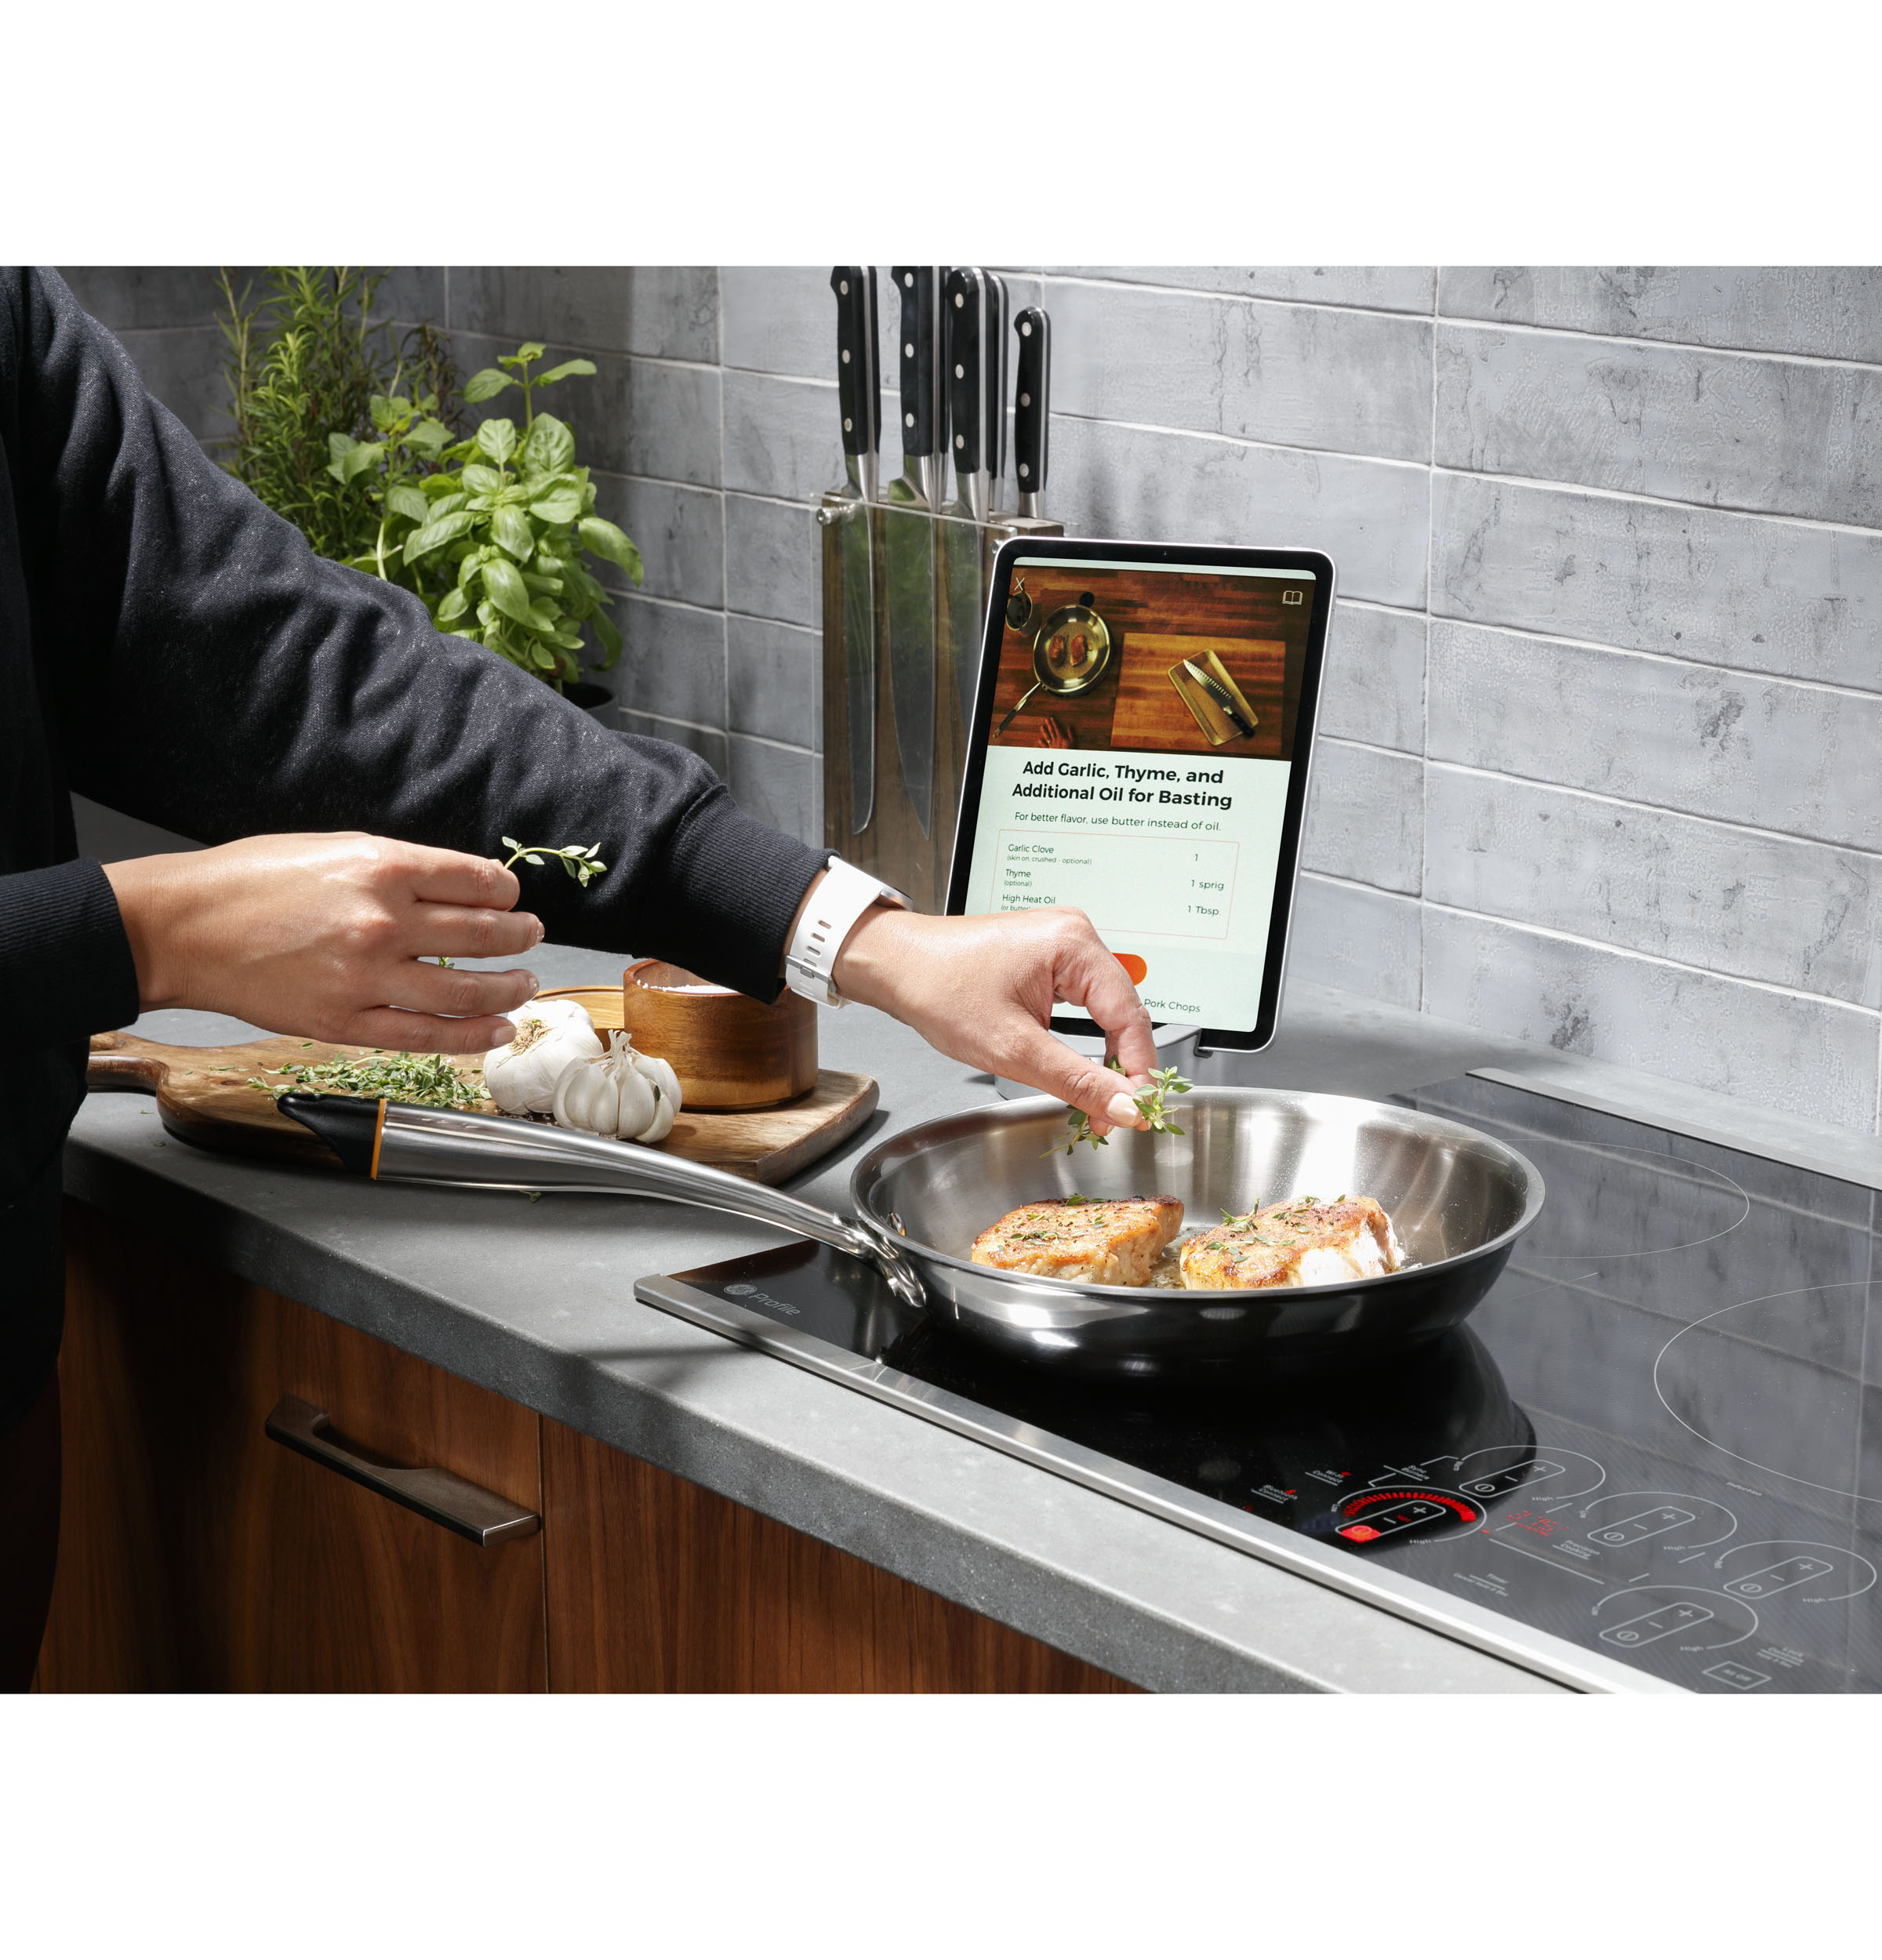 Cooking Appliances With Advanced Technology